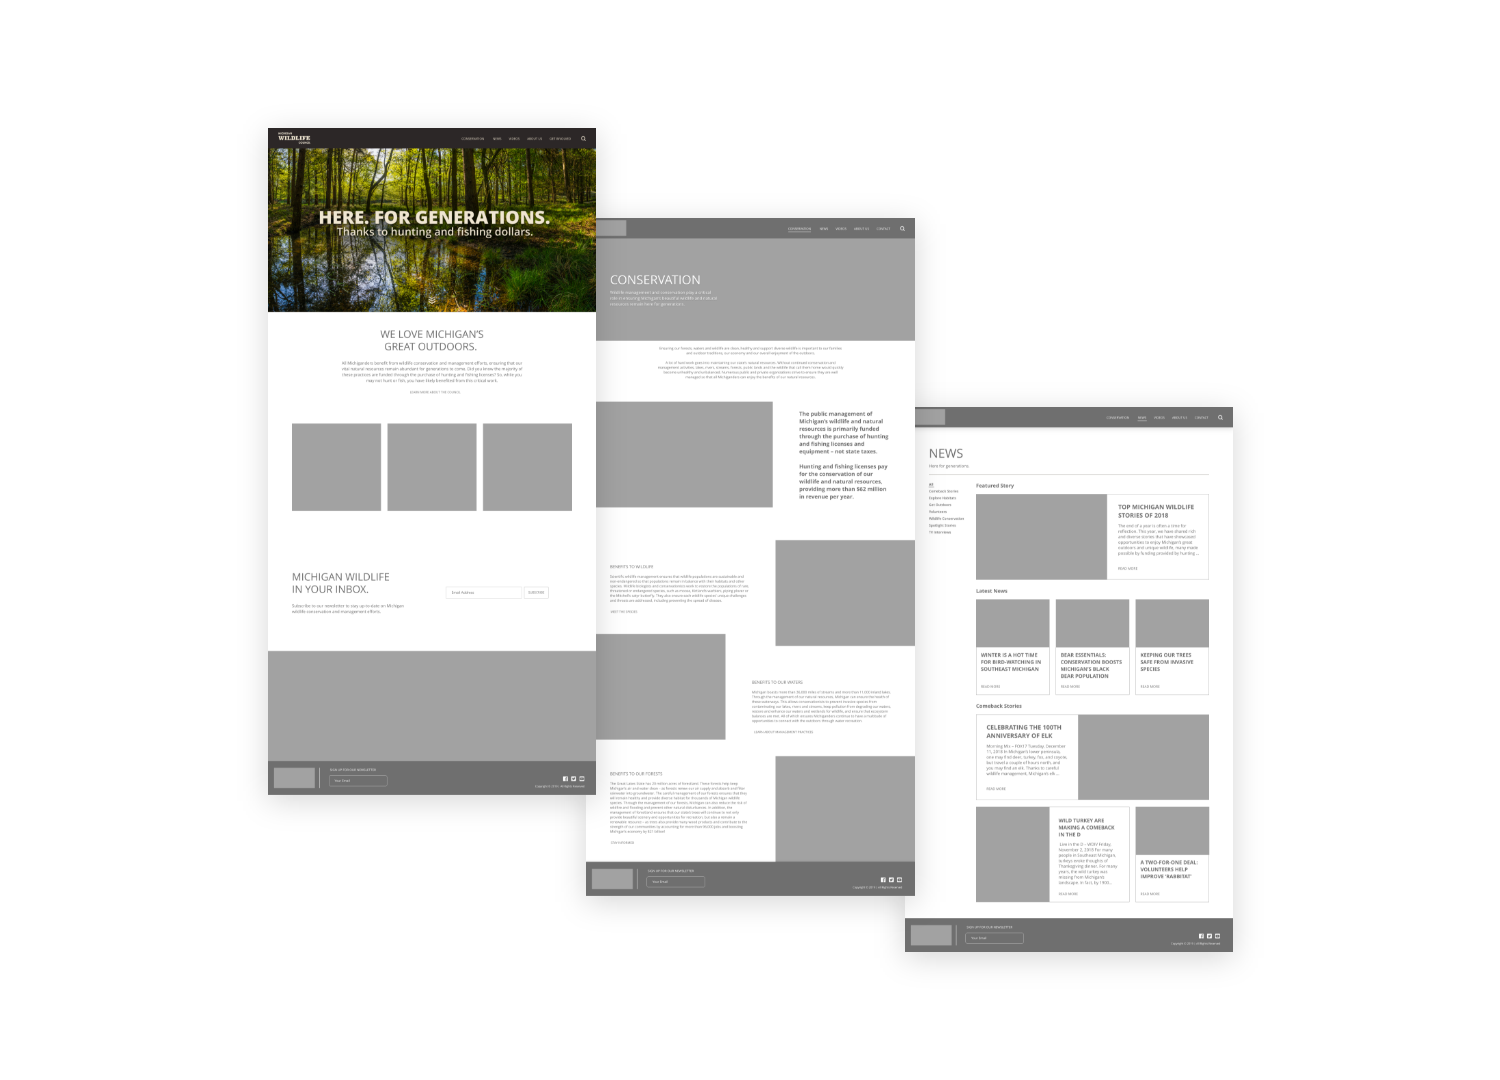 An image of Michigan Wildlife Council website wireframes. Each on uses gray squares on a white background in a modular grid to show the placement of content for the planning process.